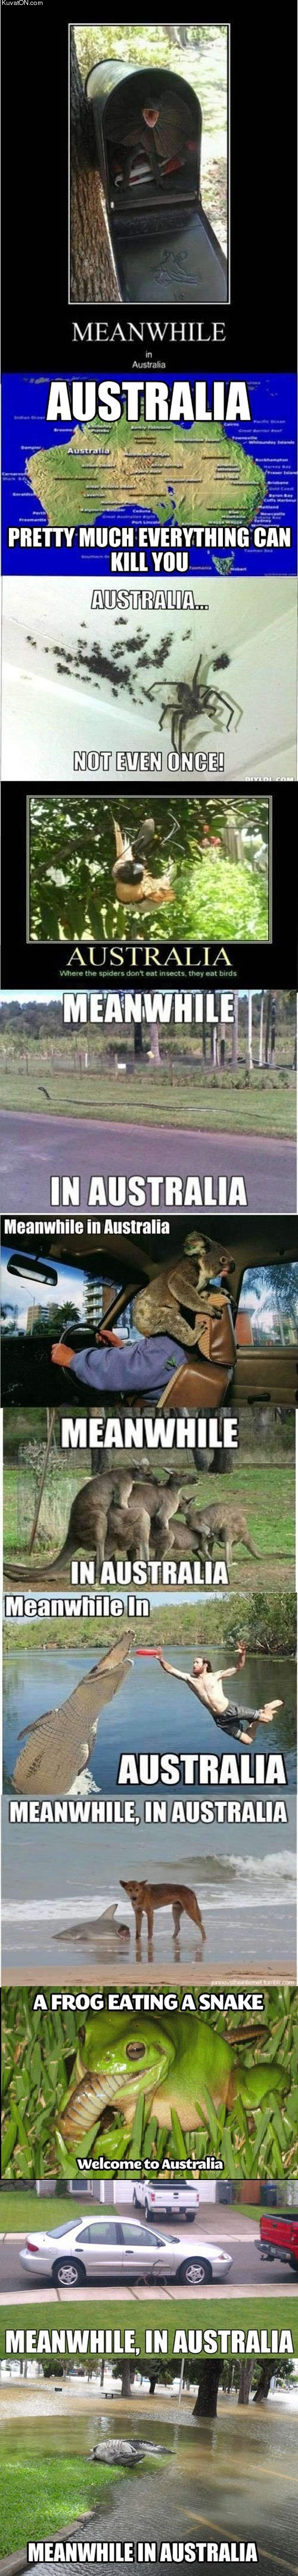 some_truths_about_australia.jpg